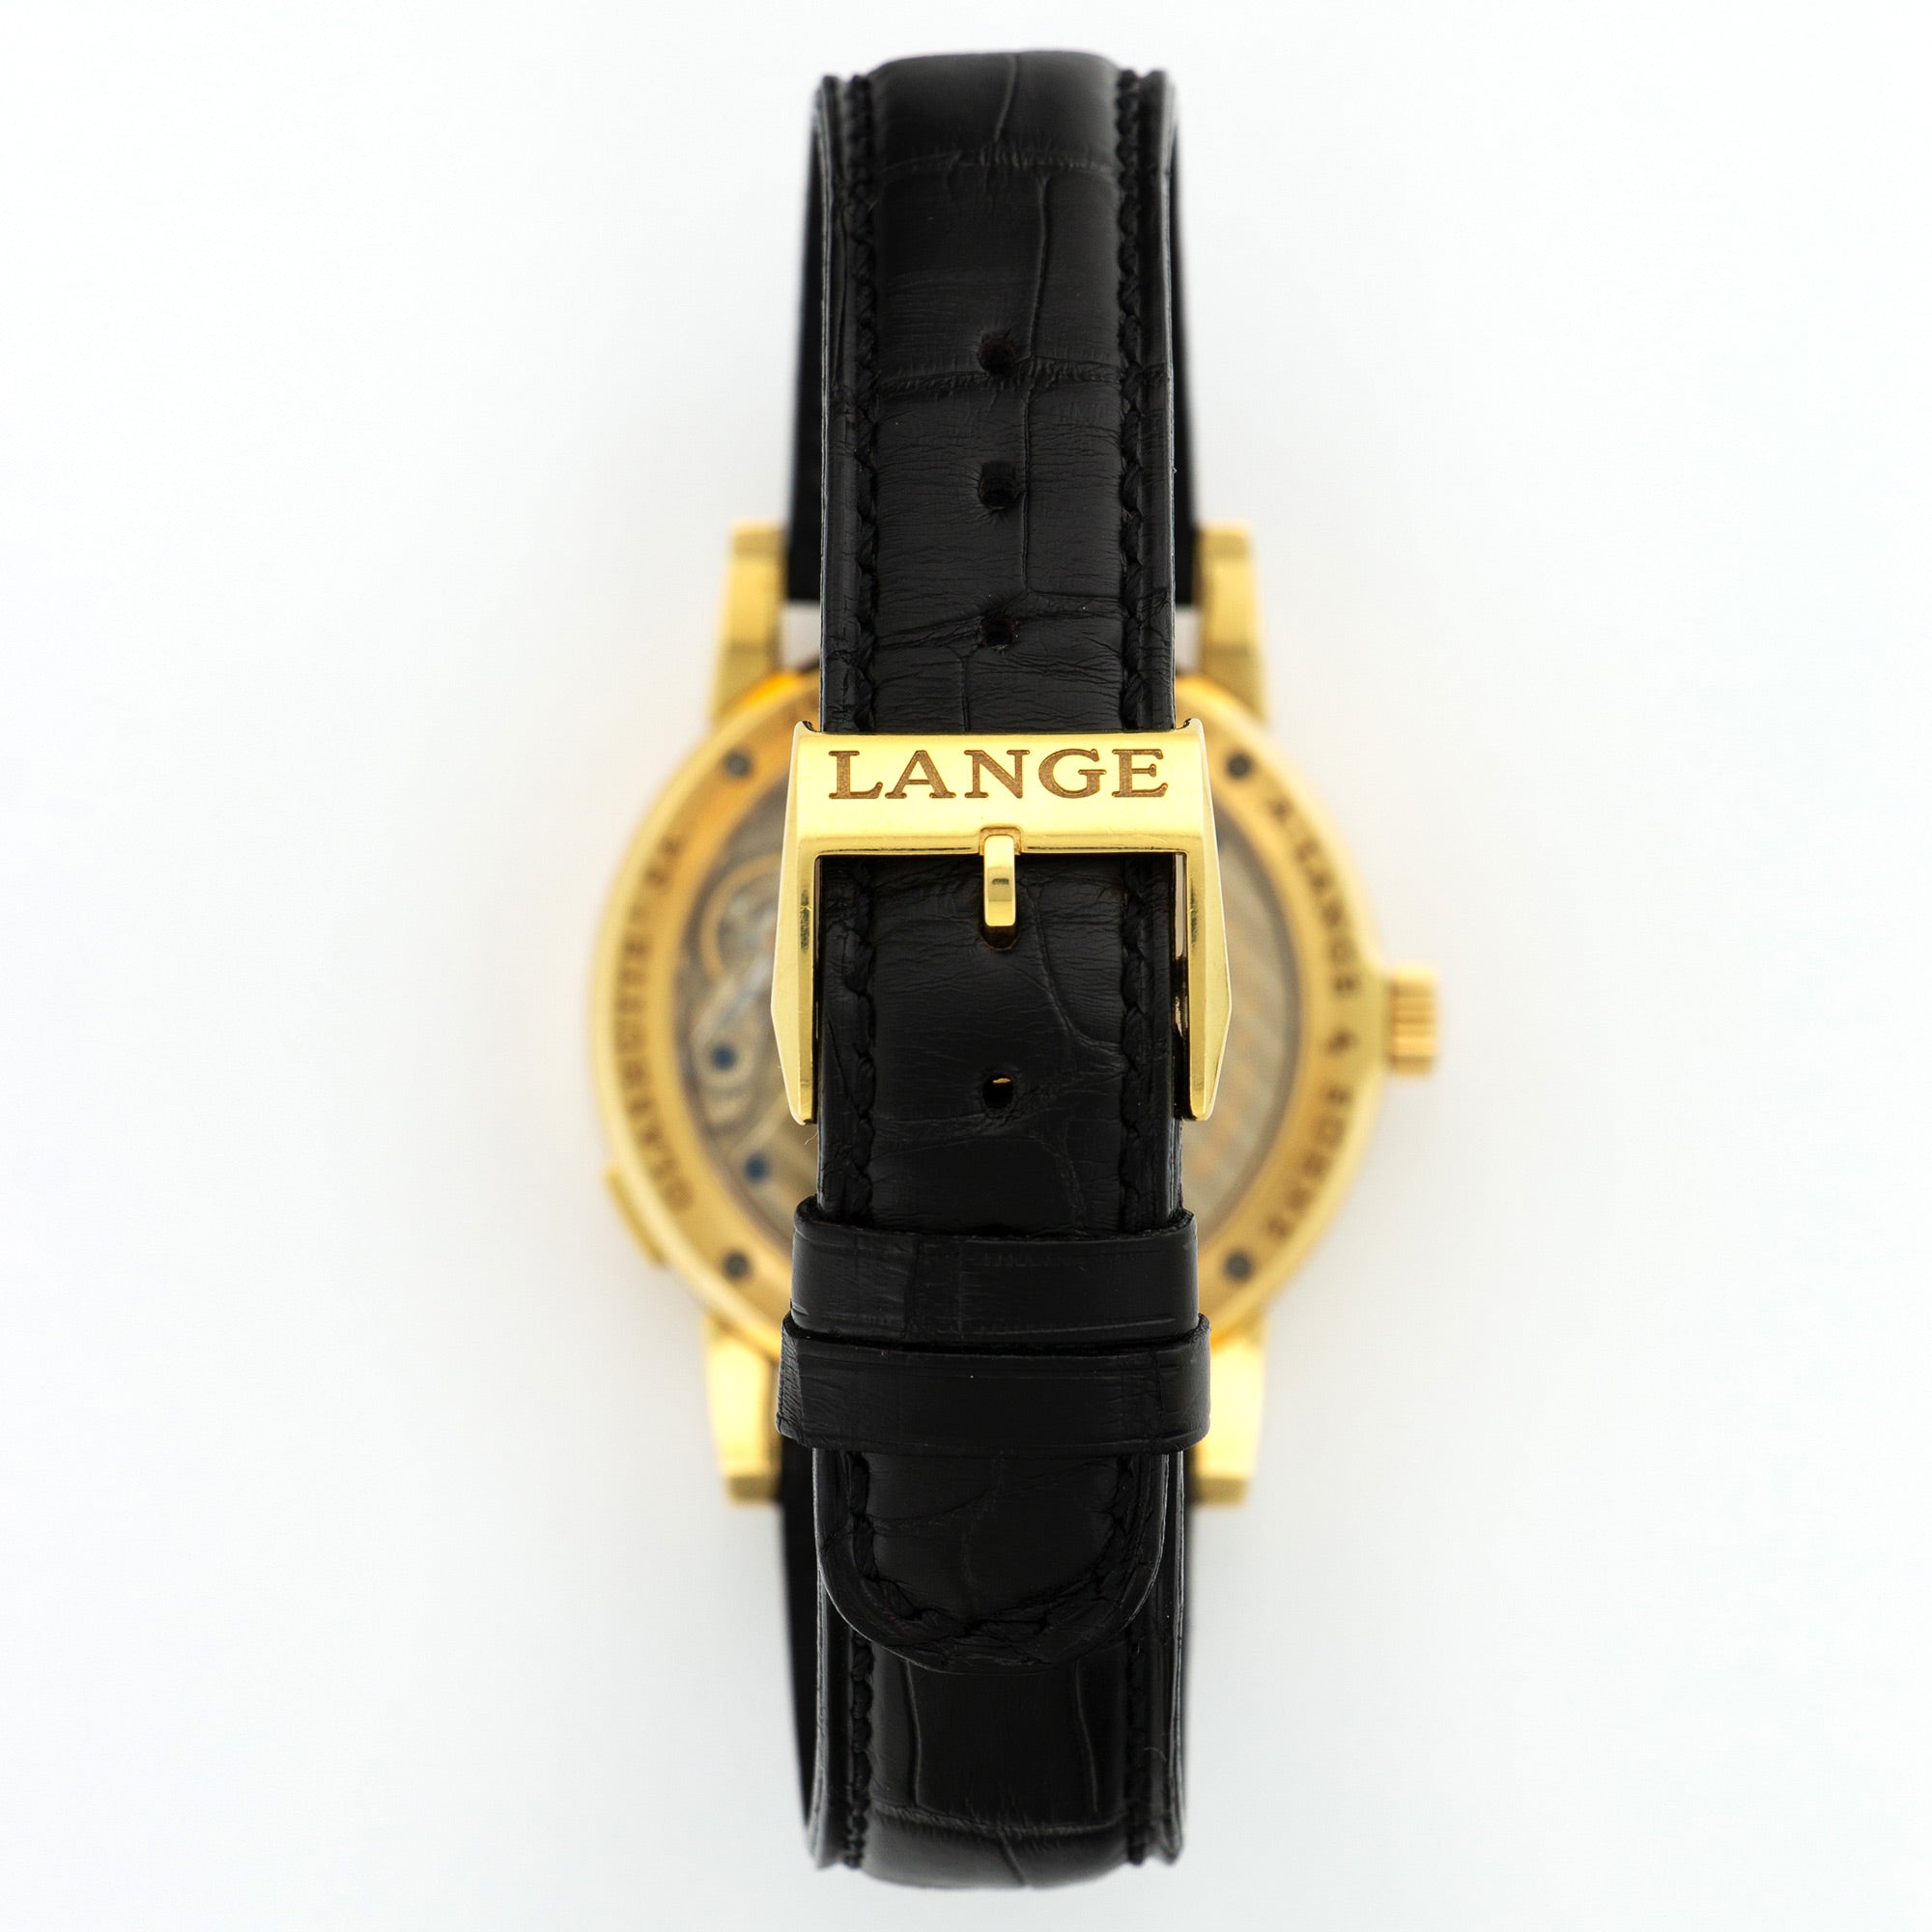 A. Lange &amp; Sohne - A. Lange &amp; Sohne Yellow Gold Lange 1 Watch Ref. 101.021 - The Keystone Watches